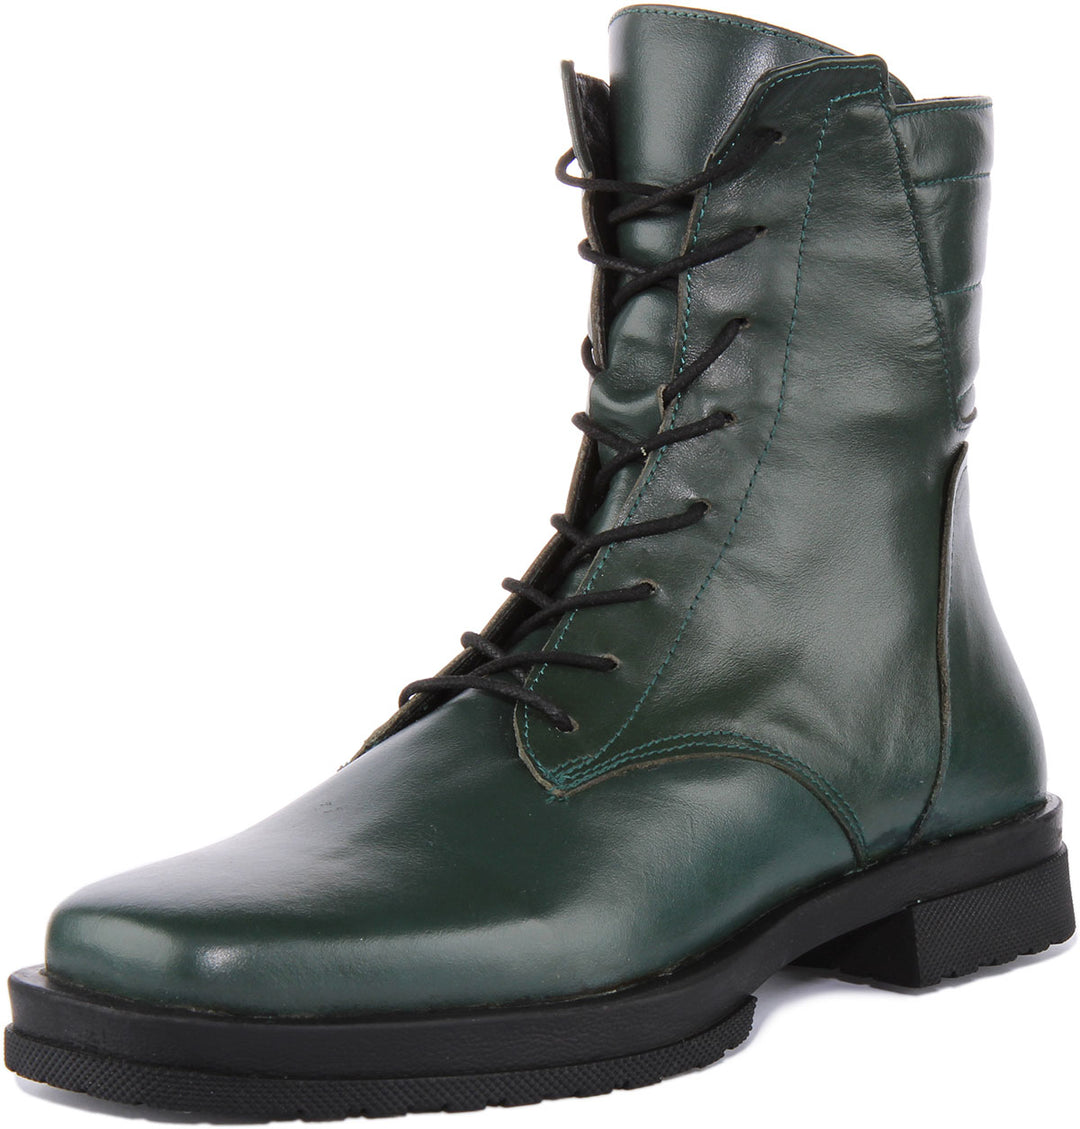 Justinreess England Womens Ankle Boots Quinn Square Toe Ankle Boots In Green